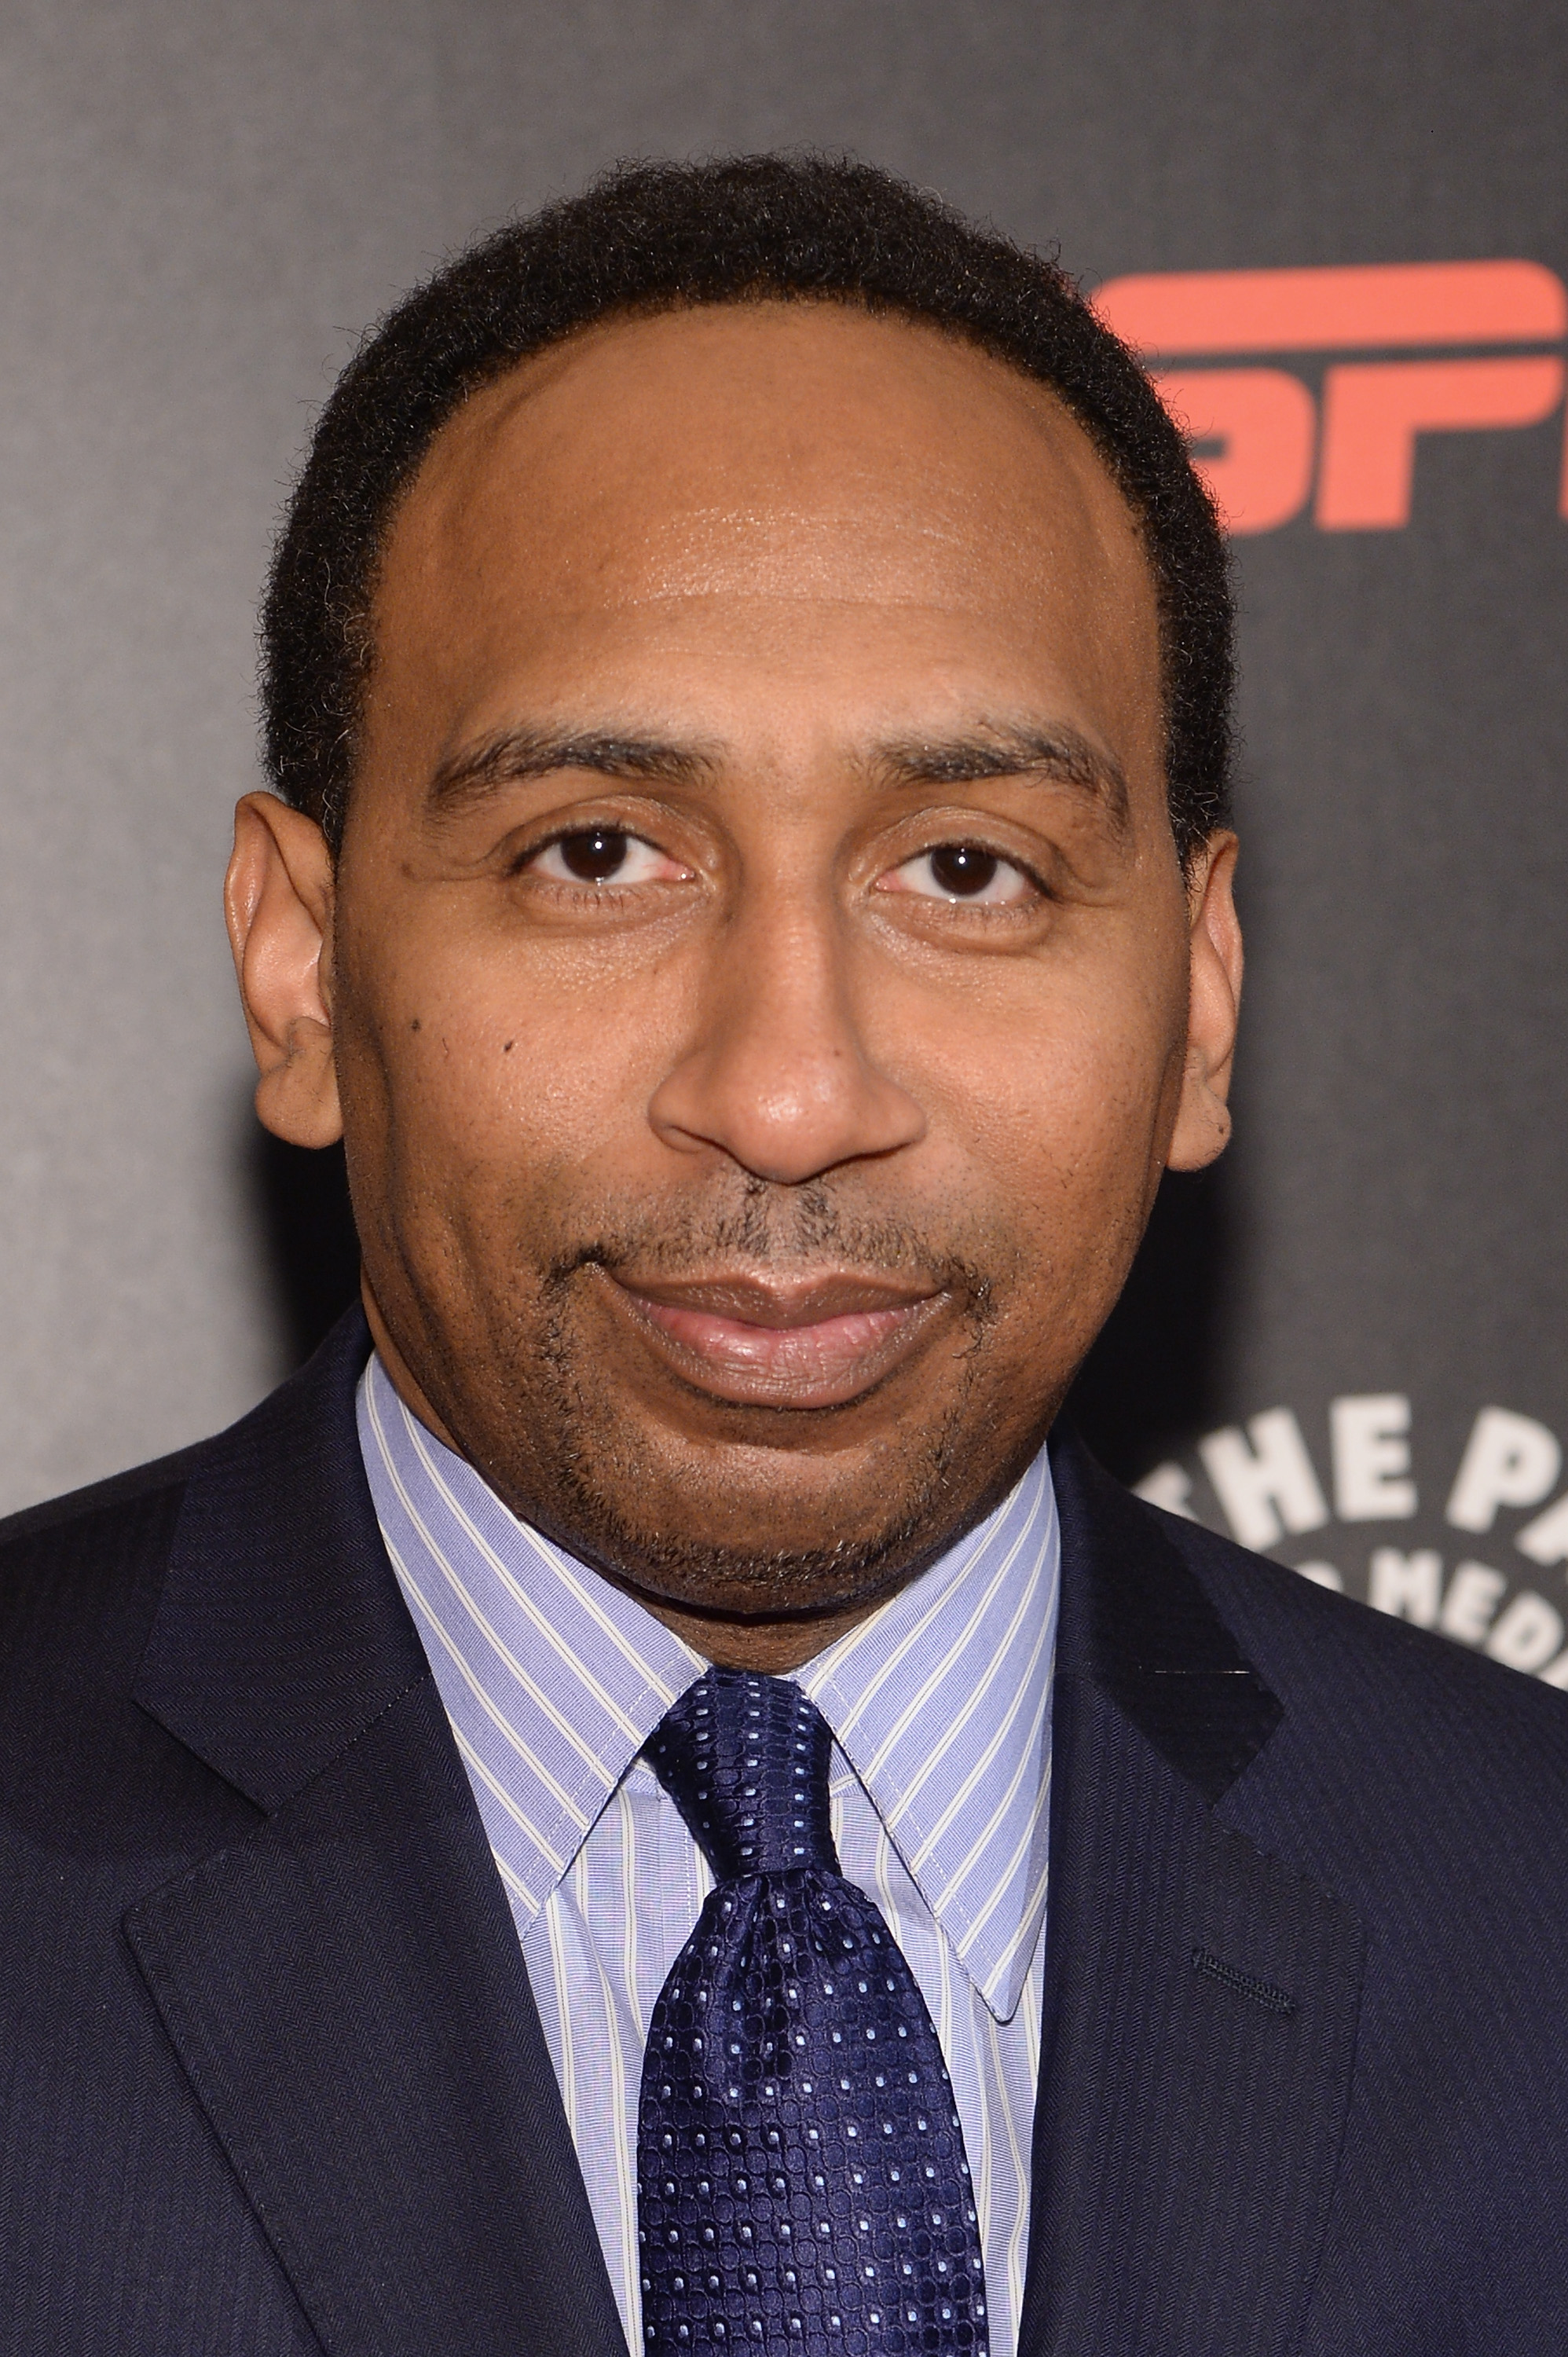 Stephen A. Smith attends the Paley Prize Gala honoring ESPN's 35th anniversary presented by Roc Nation Sports on May 28, 2014 in New York City. (Jamie McCarthy&mdash;2014 Getty Images)